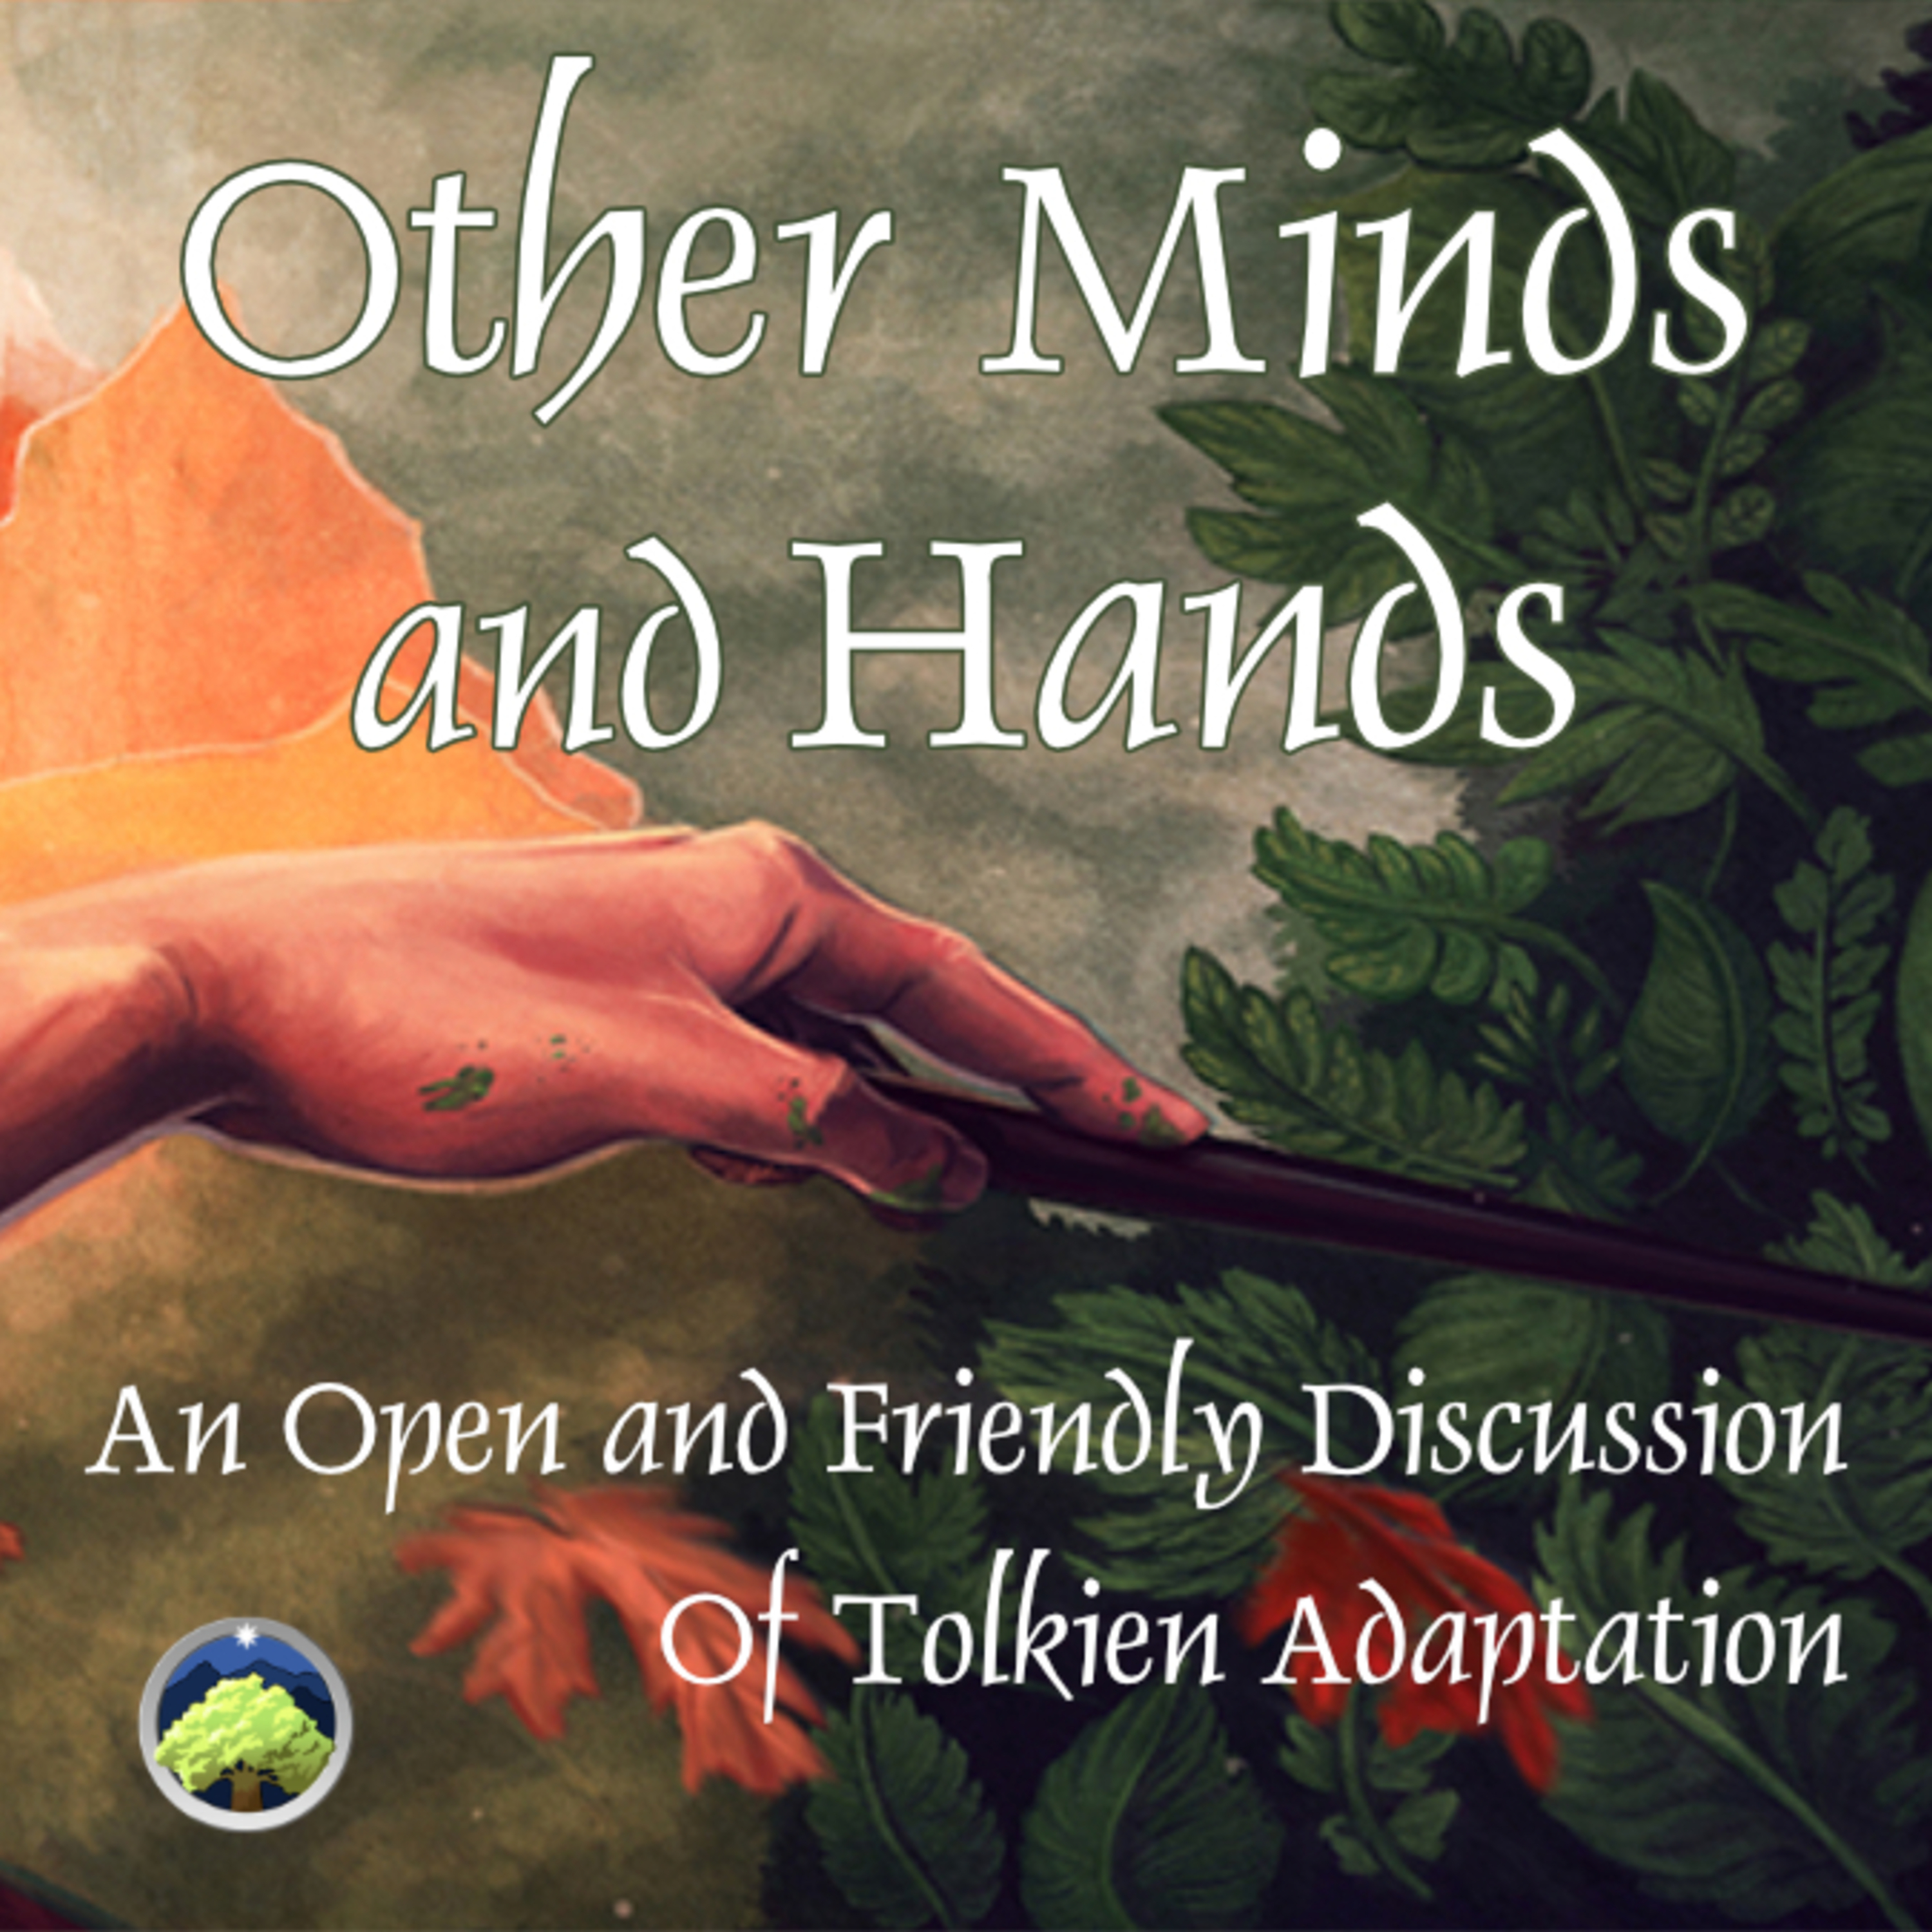 467: Other Minds and Hands, Episode 5